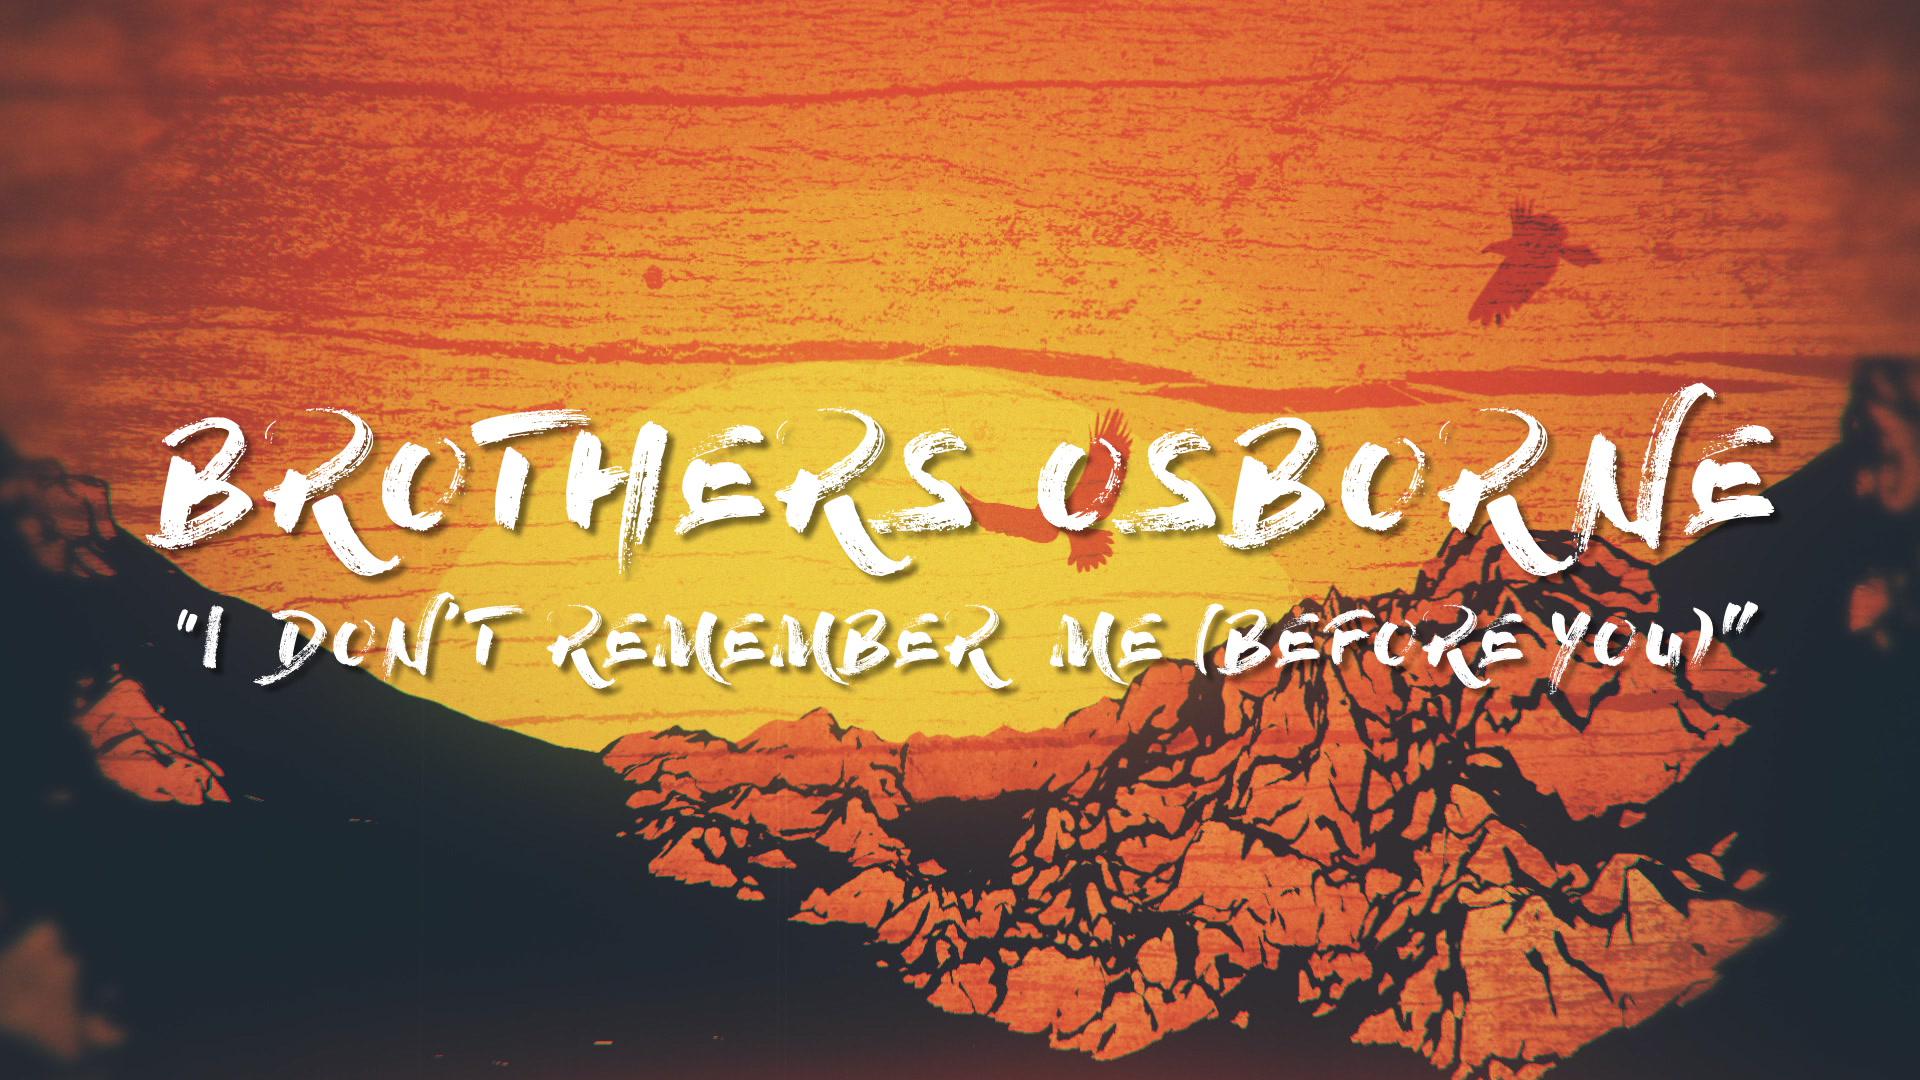 Brothers Osborne - I Don't Remember Me (Before You) (Lyric Video)